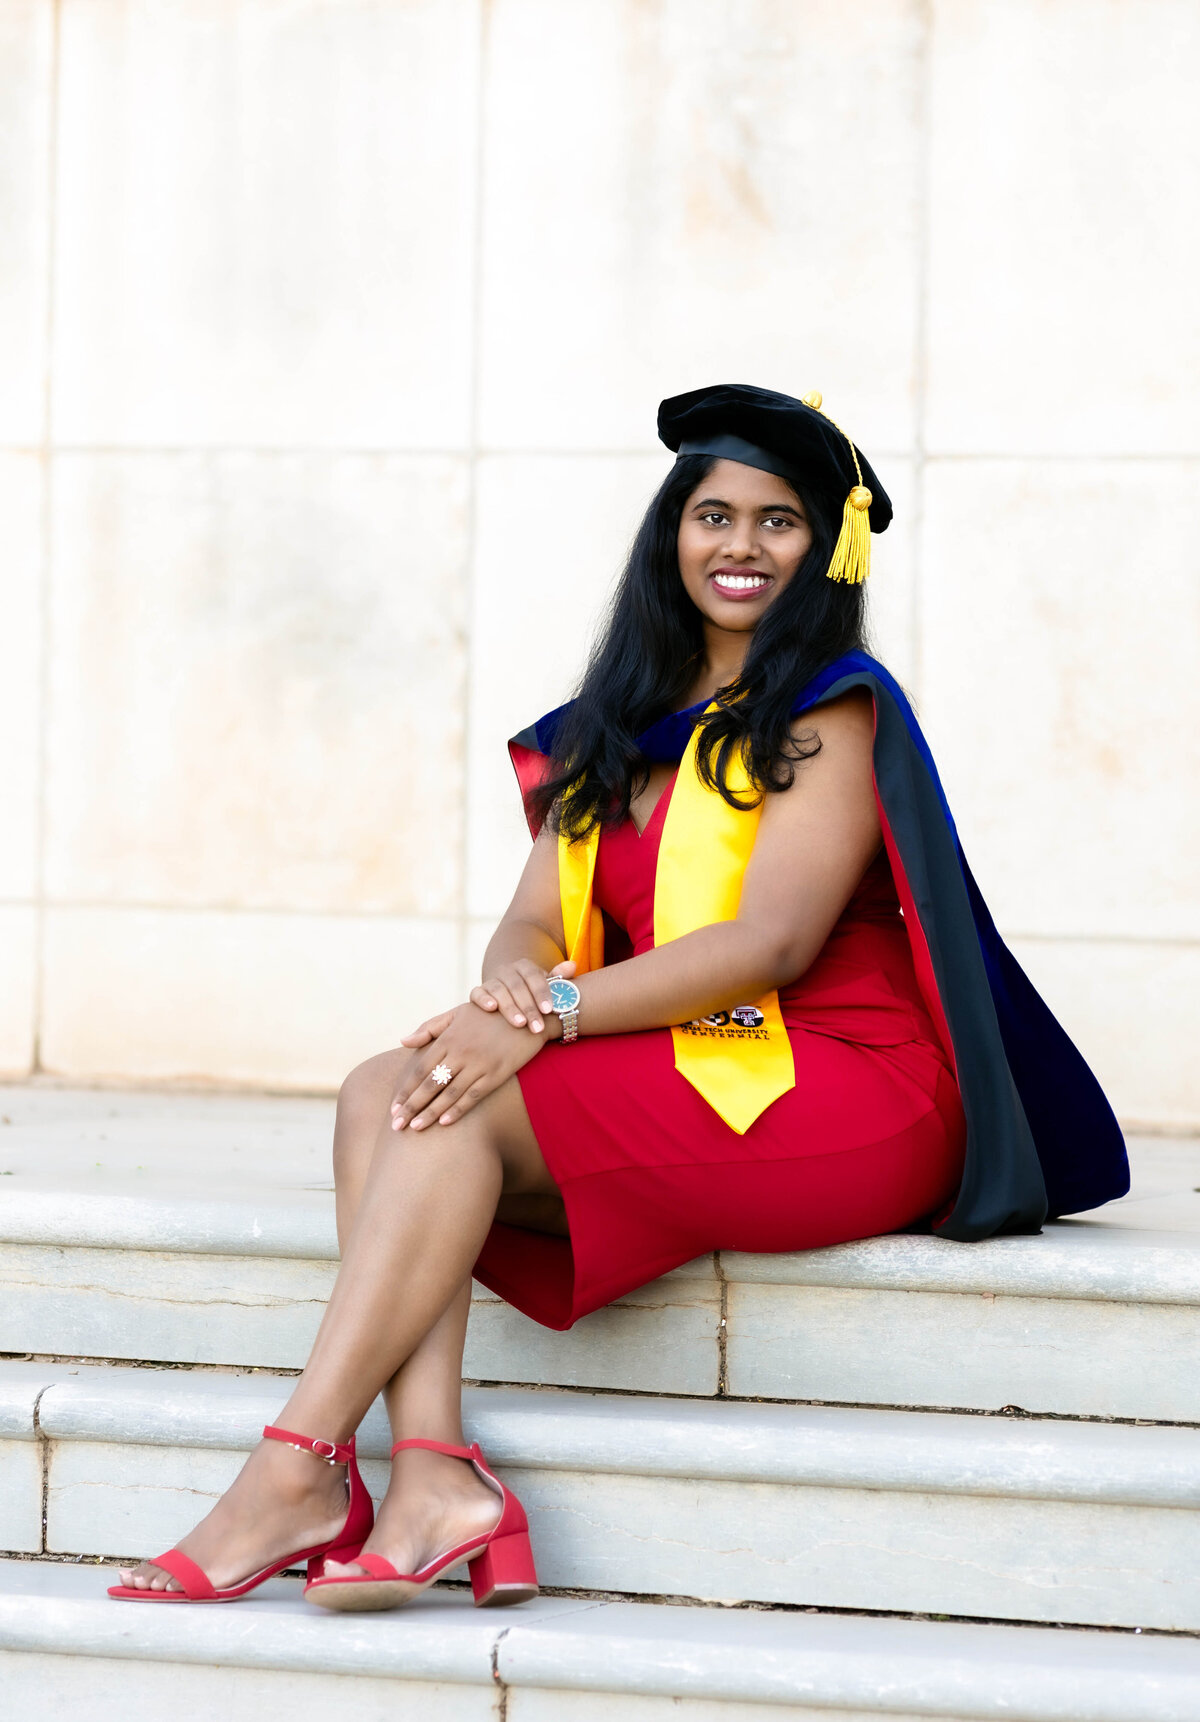 Indian college graduate session with woman wearing  a red dress and red shoes with a yellow stole seated while smiling at the camera